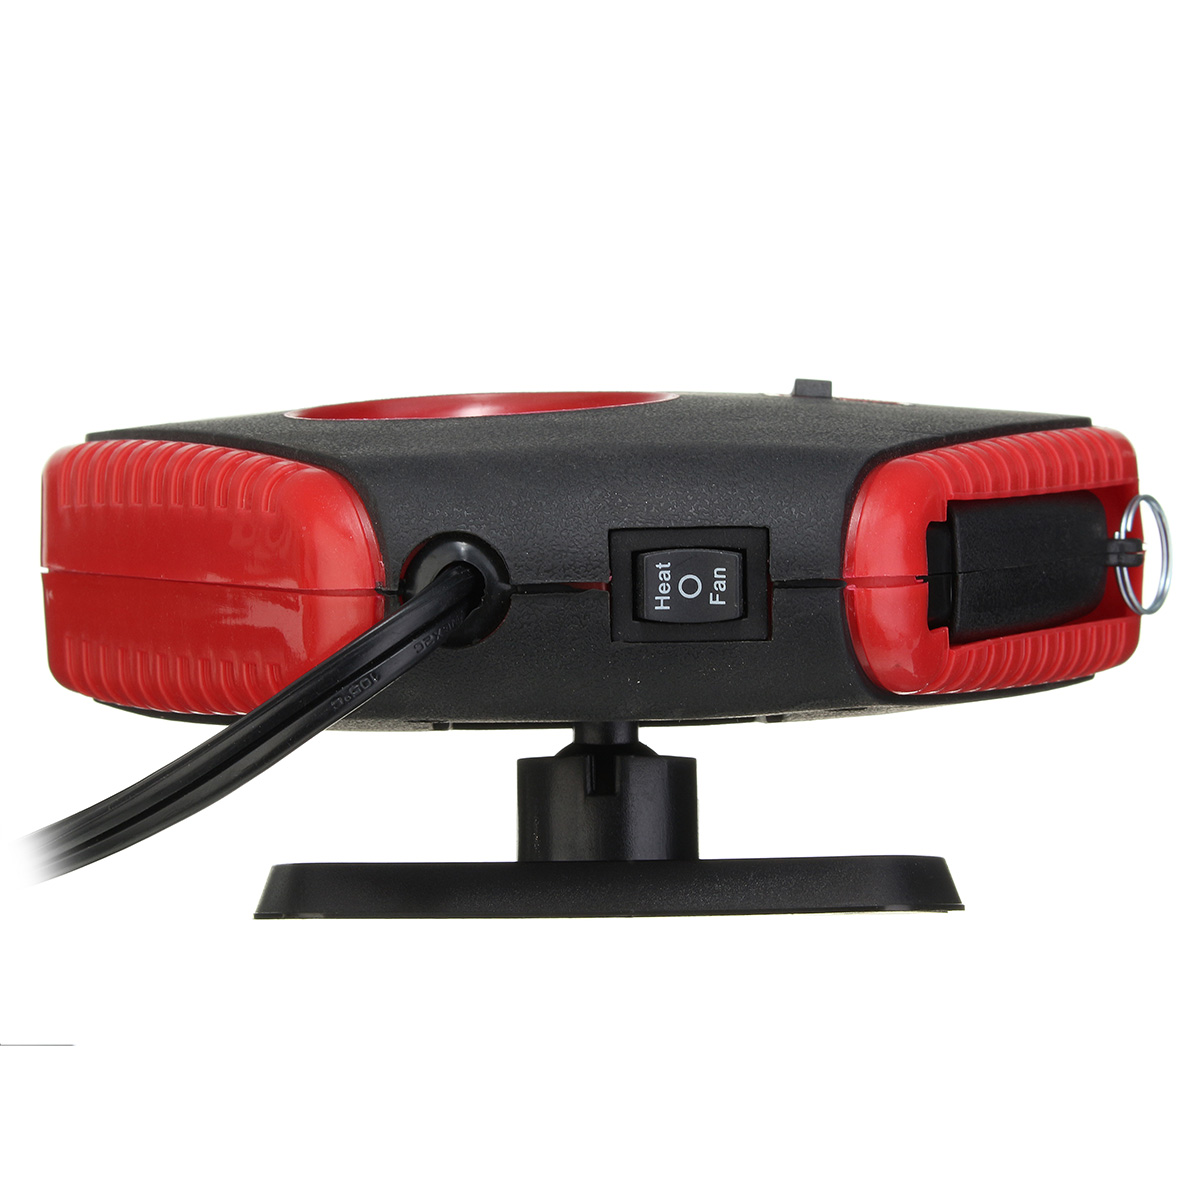 200W DC 12V Car Automatic Instant Heater Defroster Cooling Fan with 2LED Light - Auto GoShop